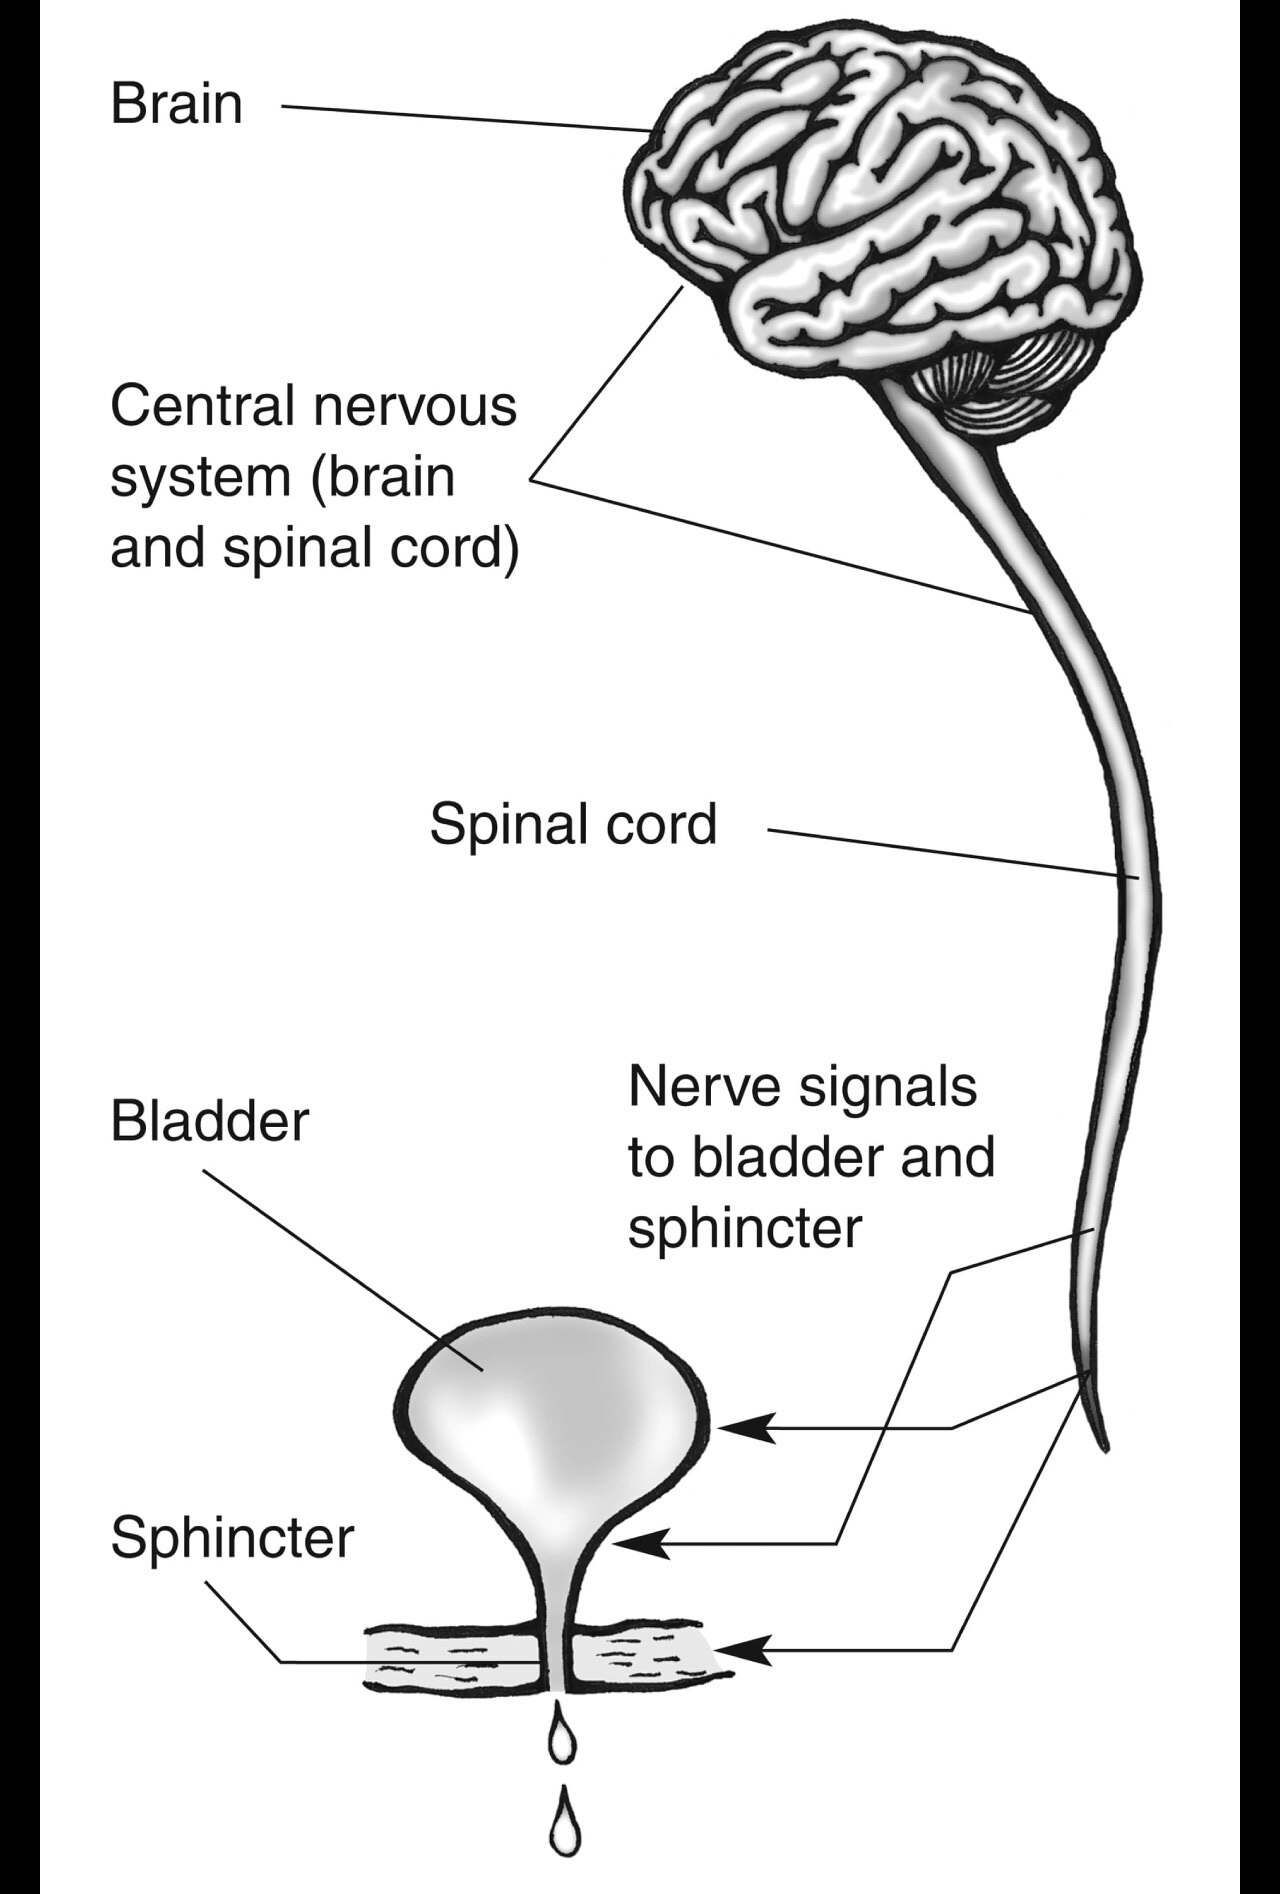 The central nervous system, which includes the brain and spinal cord, showing nerve signals travelling from the brain, through the spinal cord, to the bladder, urethra, and sphincter muscles.